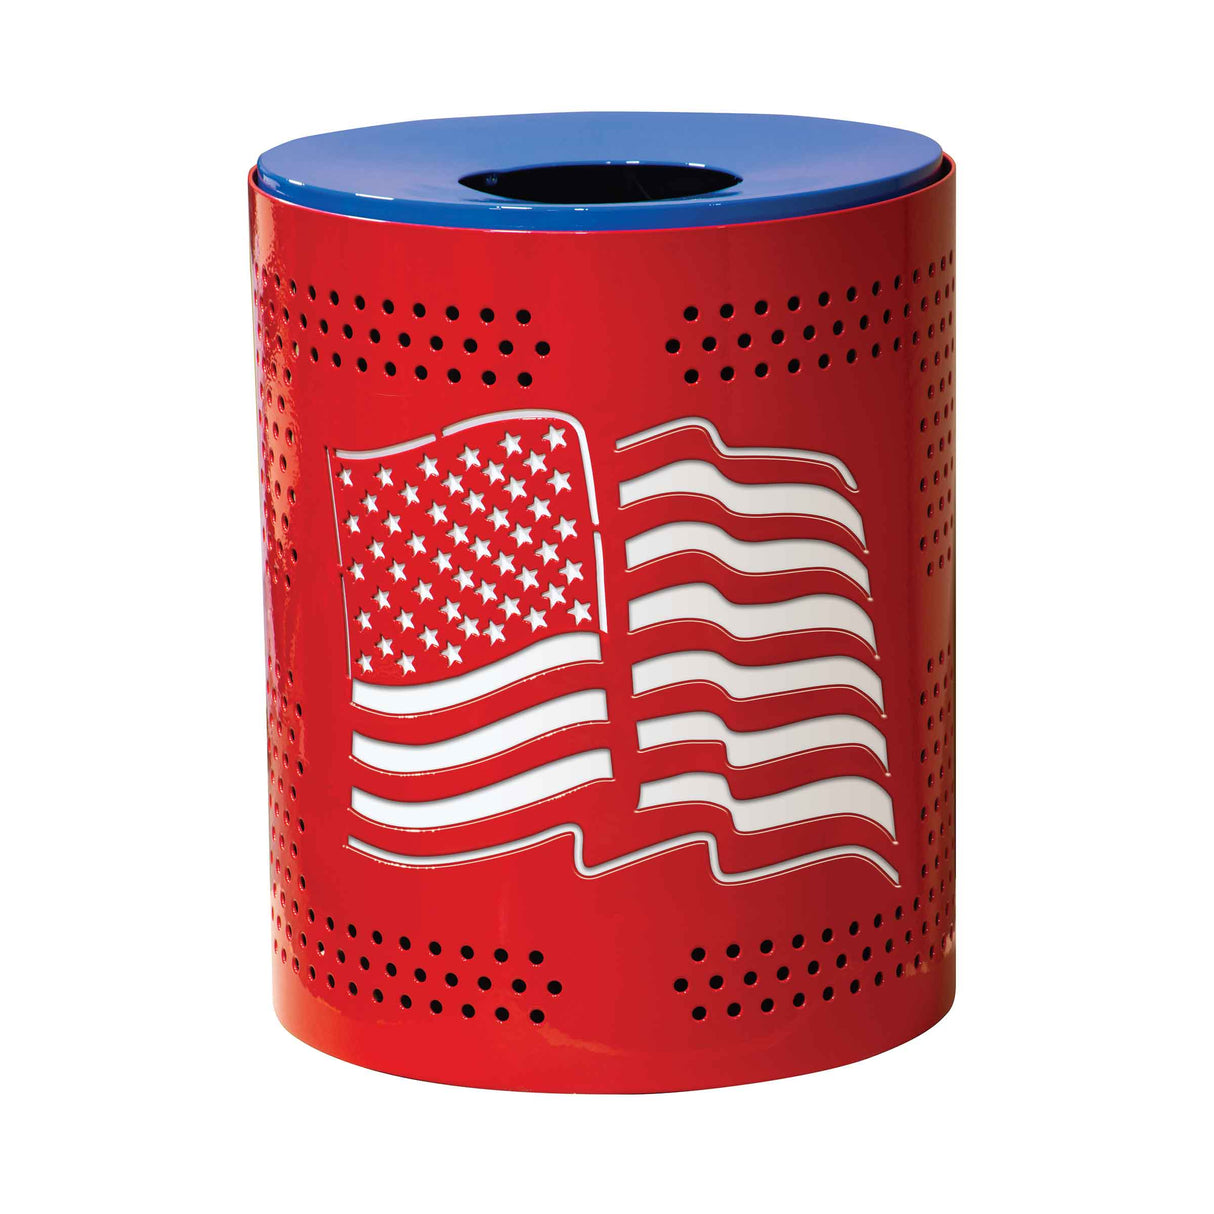 32 Gallon Personalized Multicolor Perforated Receptacle